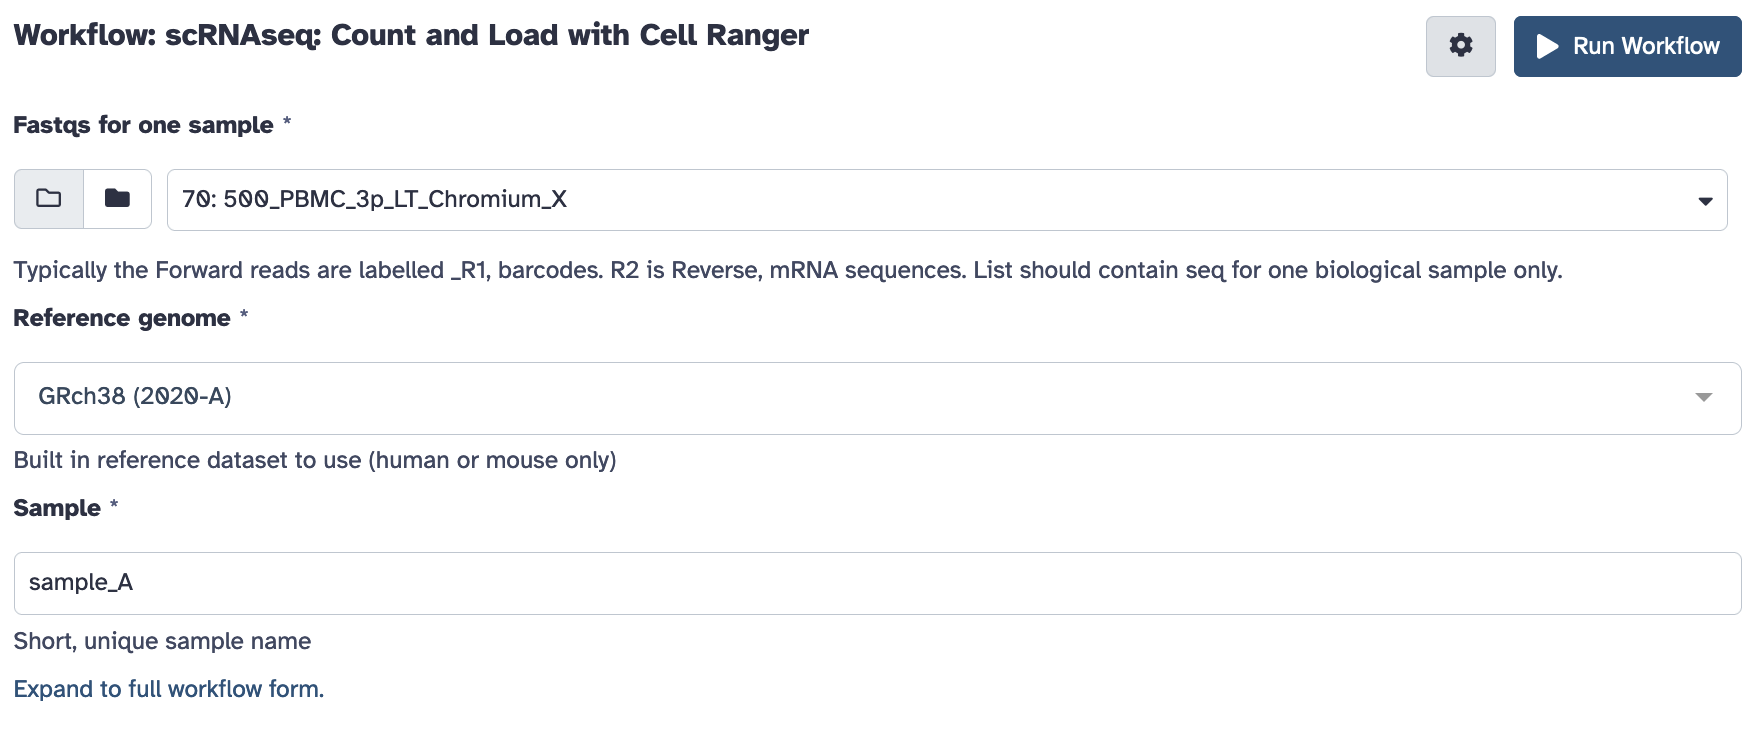 Cellranger Launch prompt, requests fastqs, reference genome dropdown, and sample name